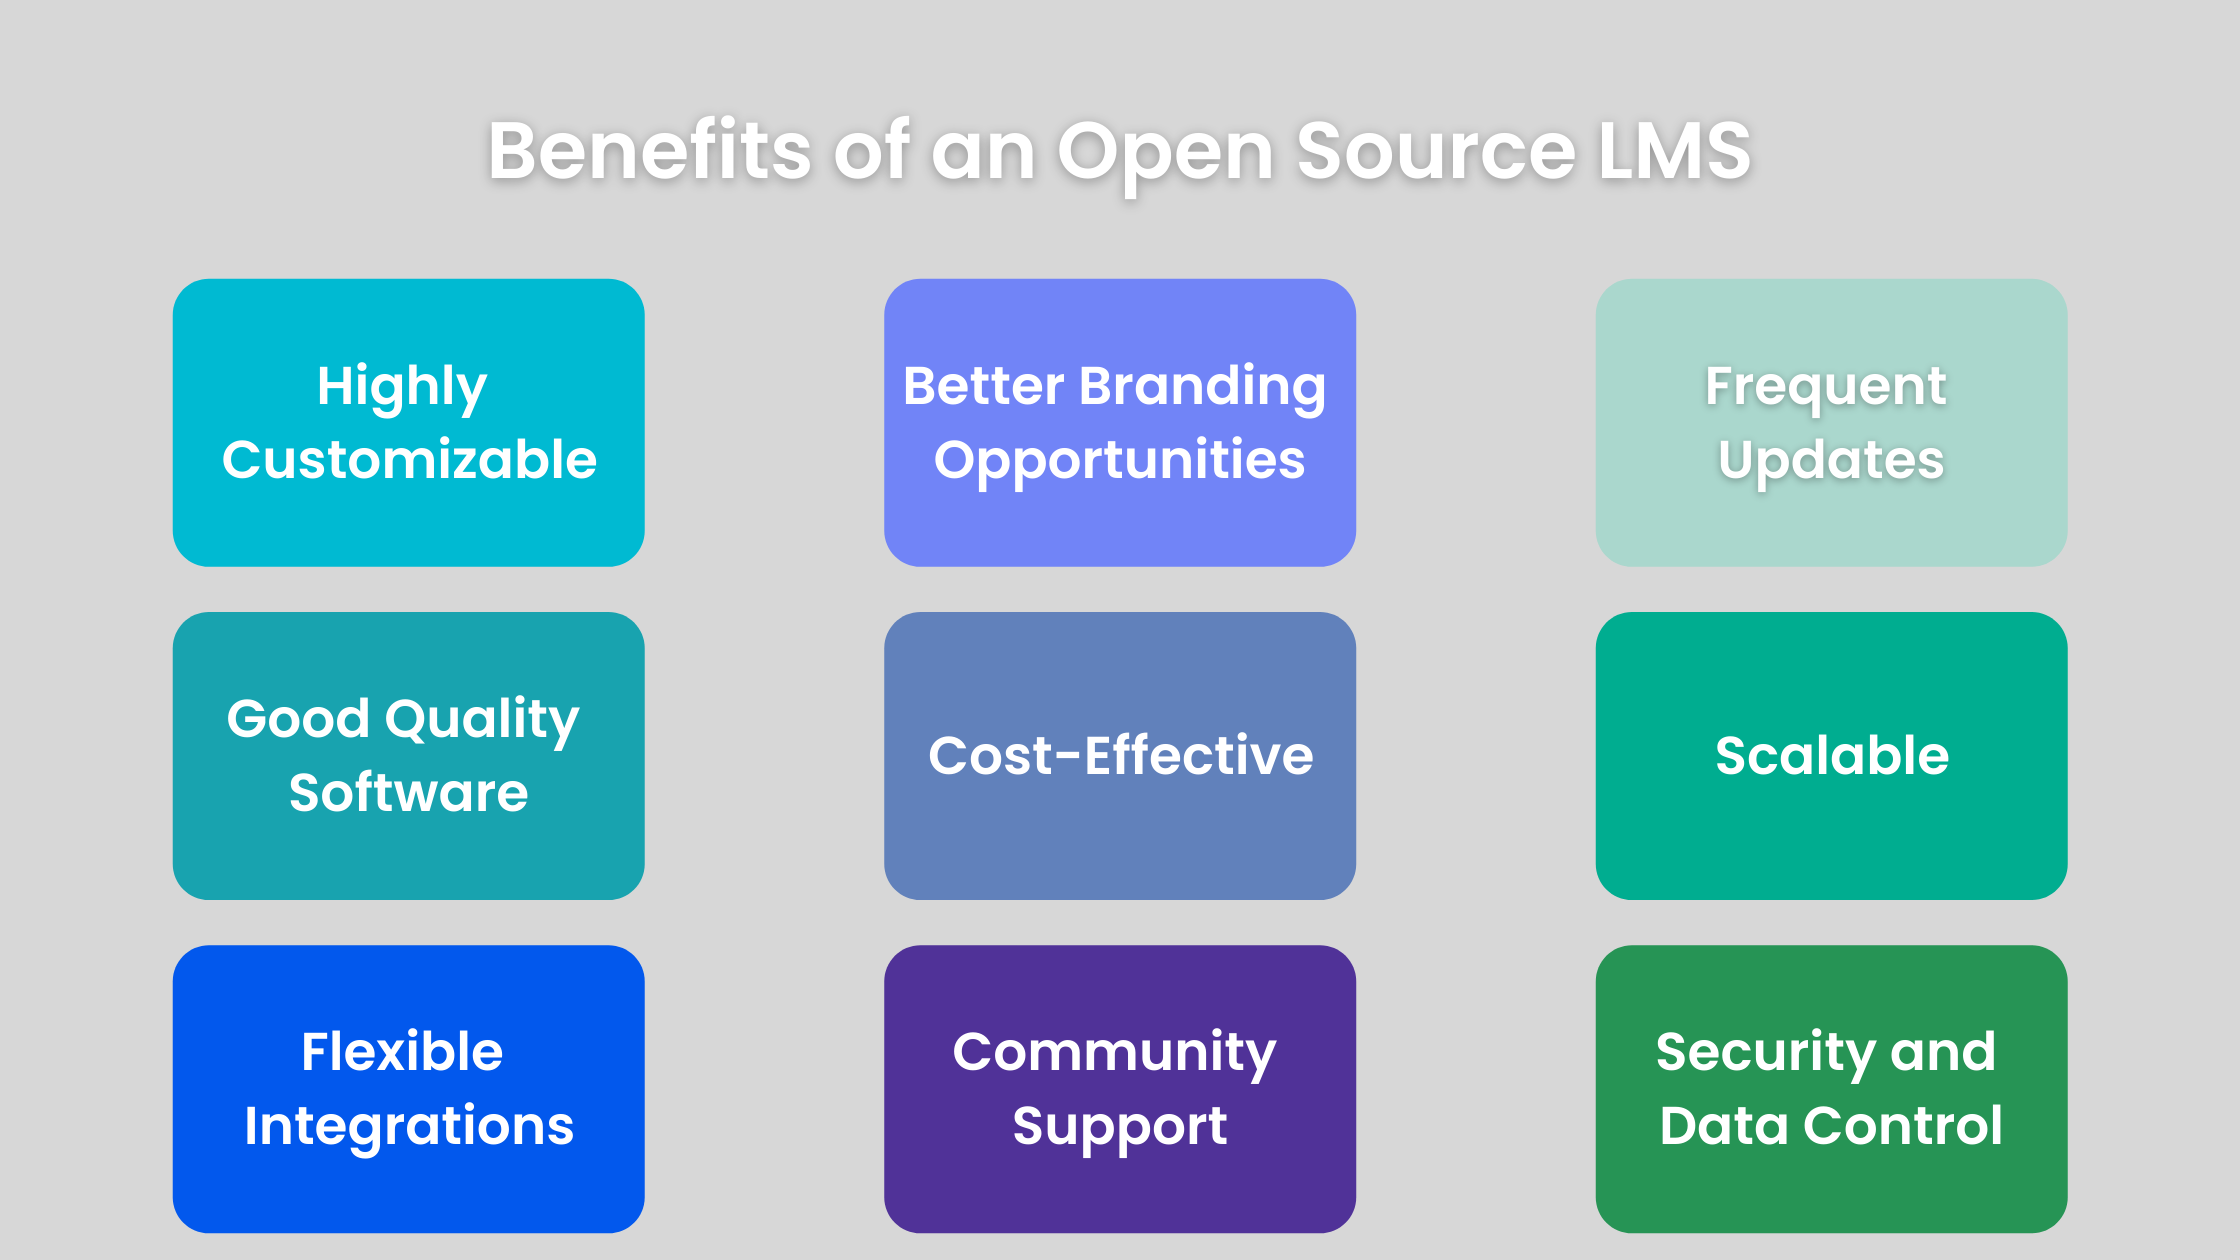 Benefits of an Open Source LMS